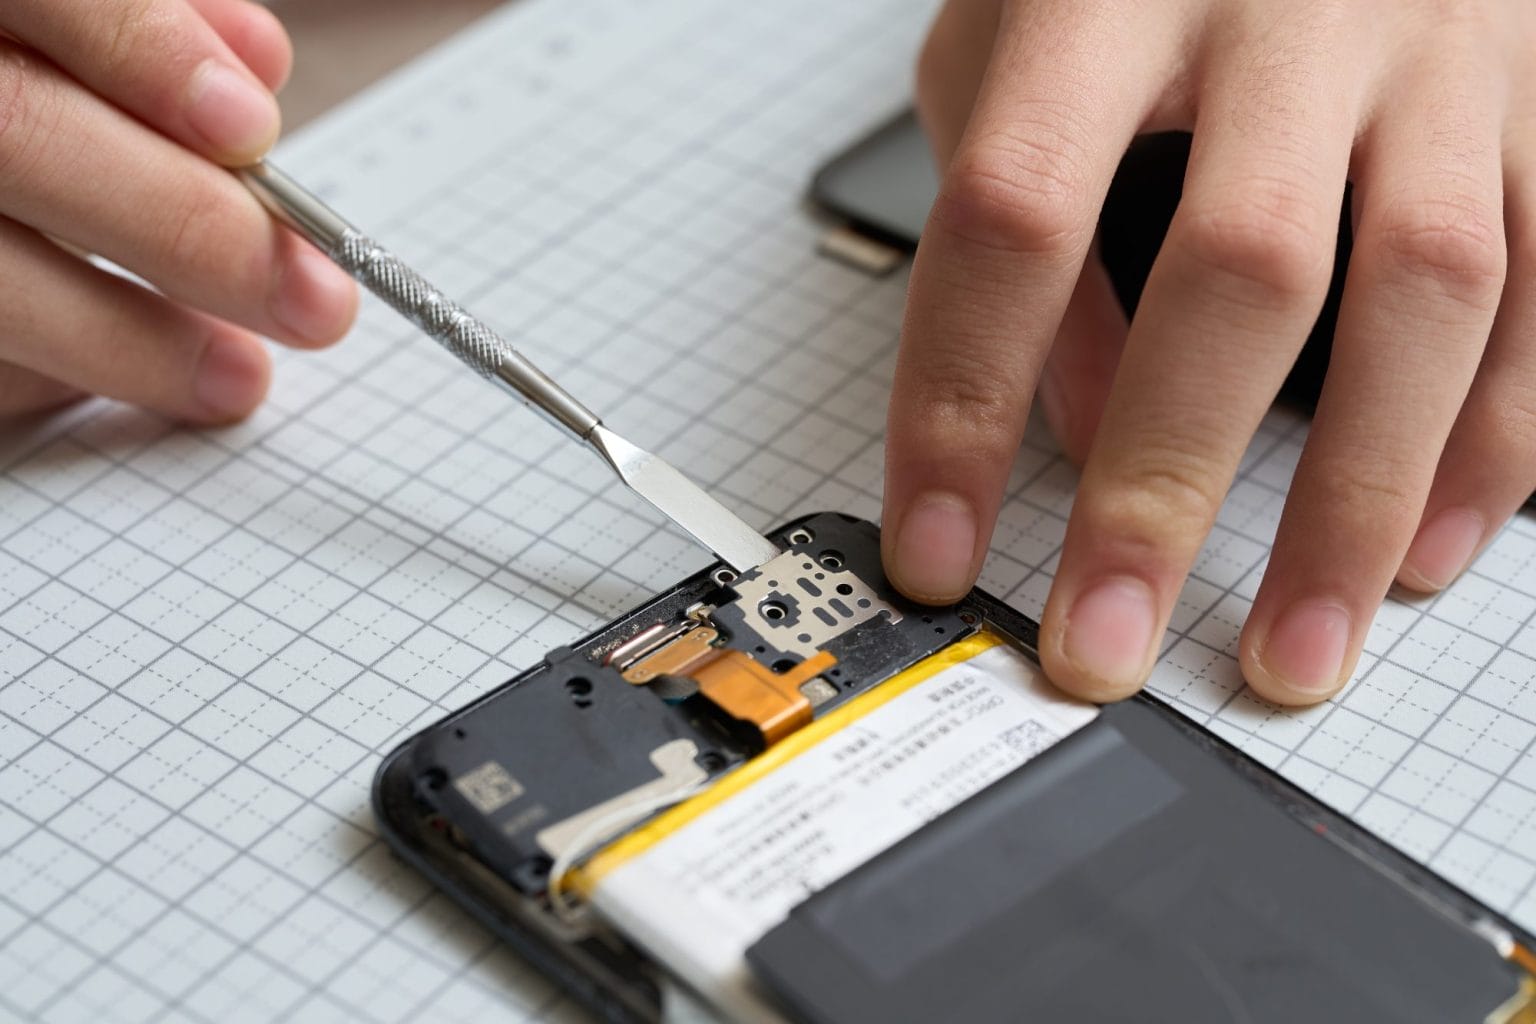 Hands performing disassembly maintenance of smartphones